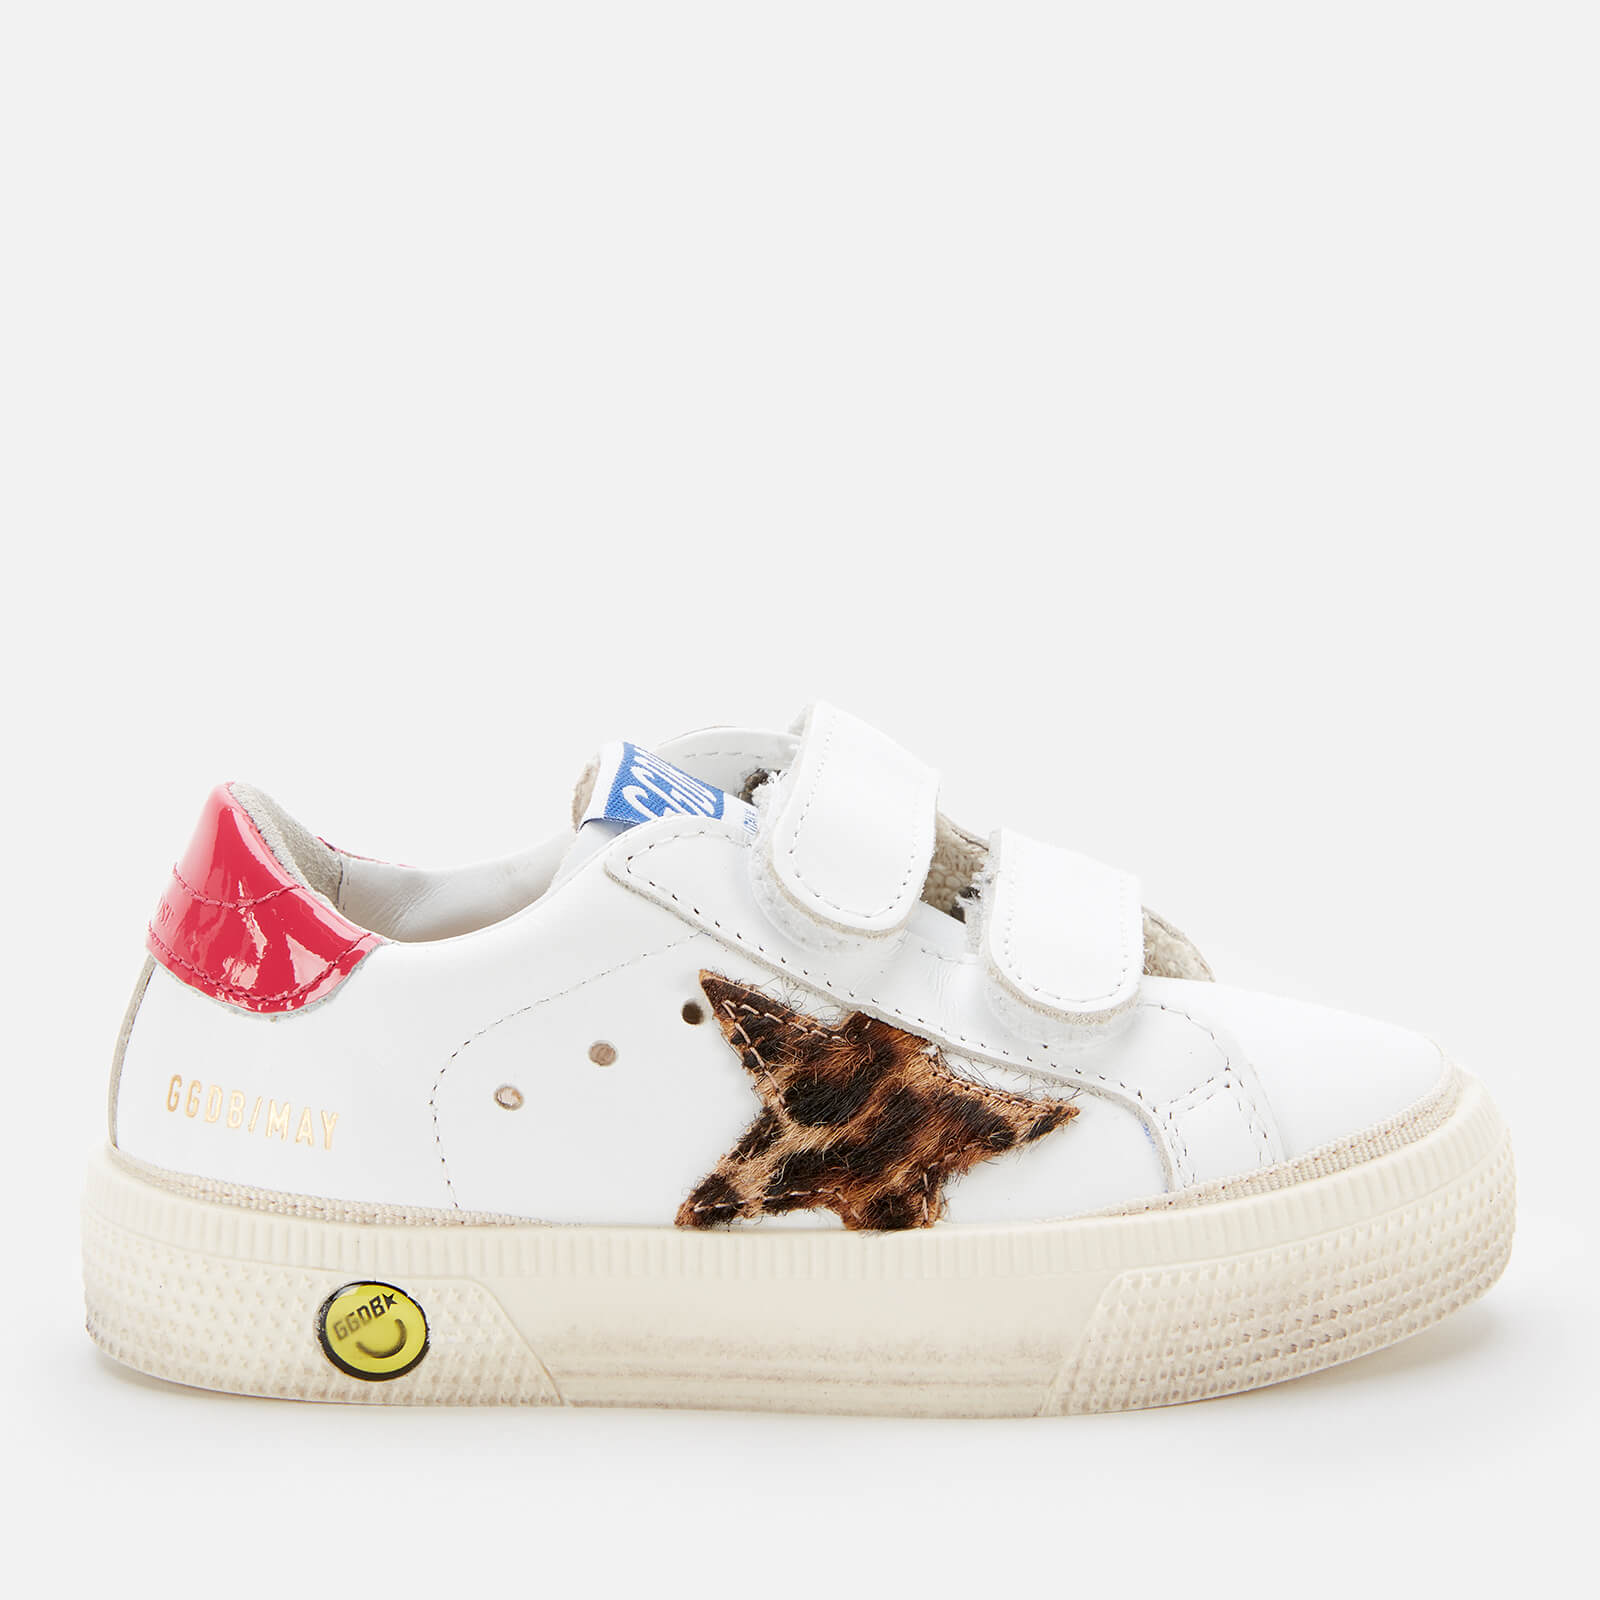 Golden Goose Toddlers' Leather Upper And Stripes Leopard Horsy Trainers - White/Beige Brown Leo/Fuxia - UK 6 Toddler